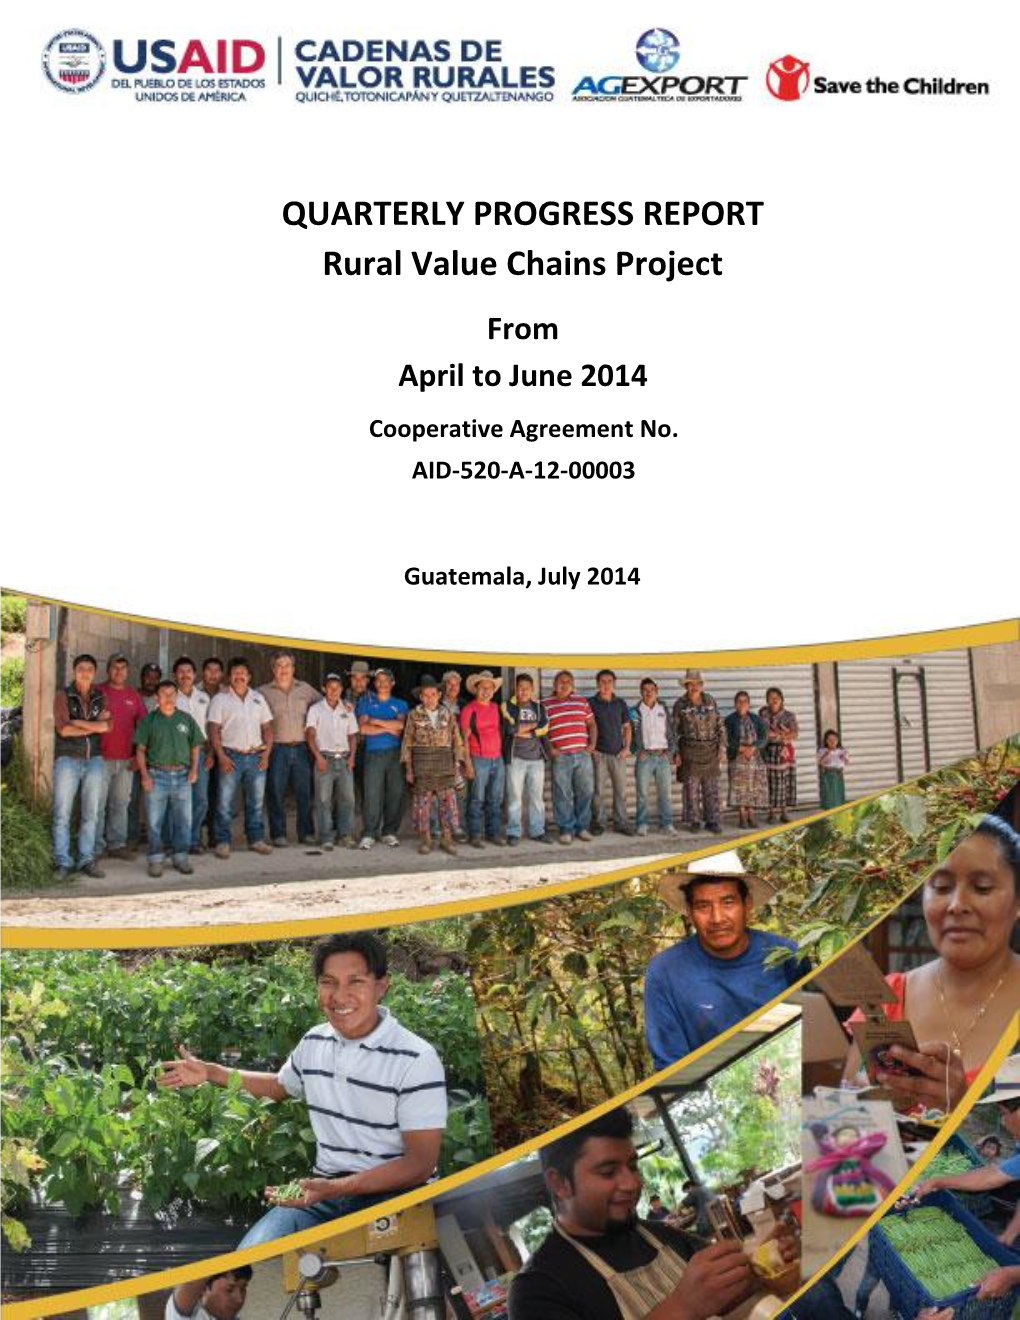 QUARTERLY PROGRESS REPORT Rural Value Chains Project from April to June 2014 Cooperative Agreement No